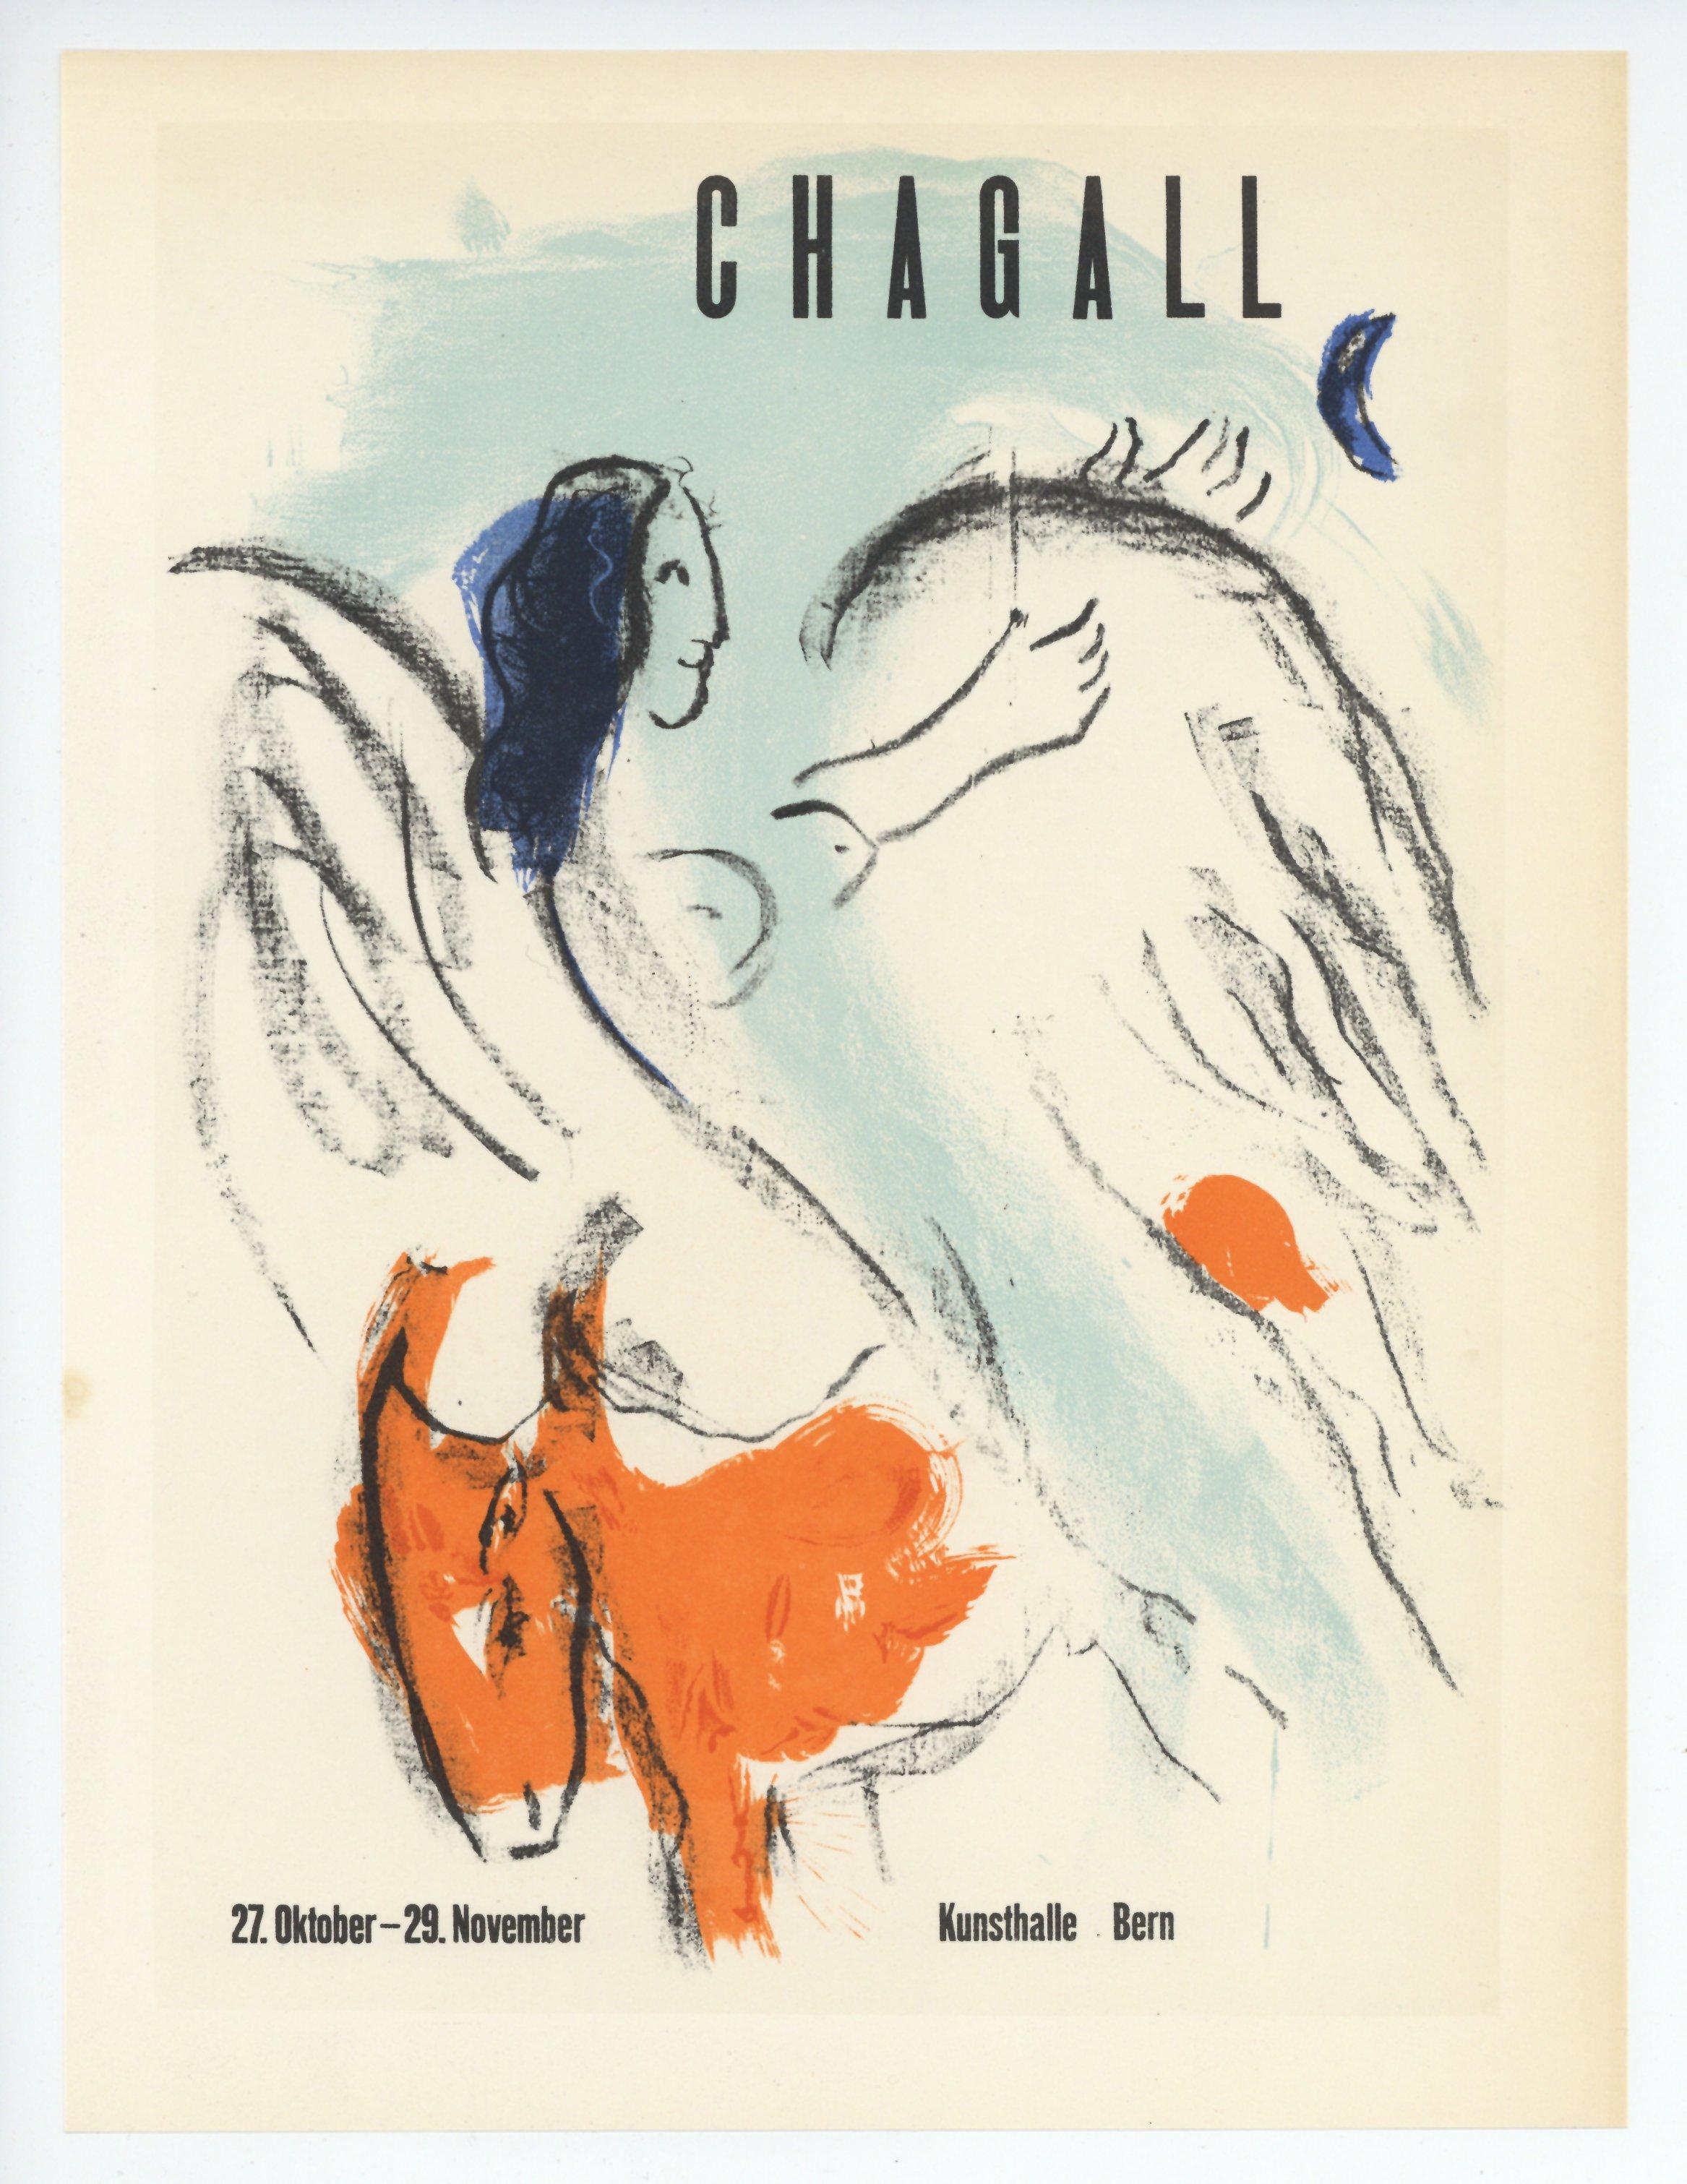 Chagall lithograph poster - Print by (after) Marc Chagall